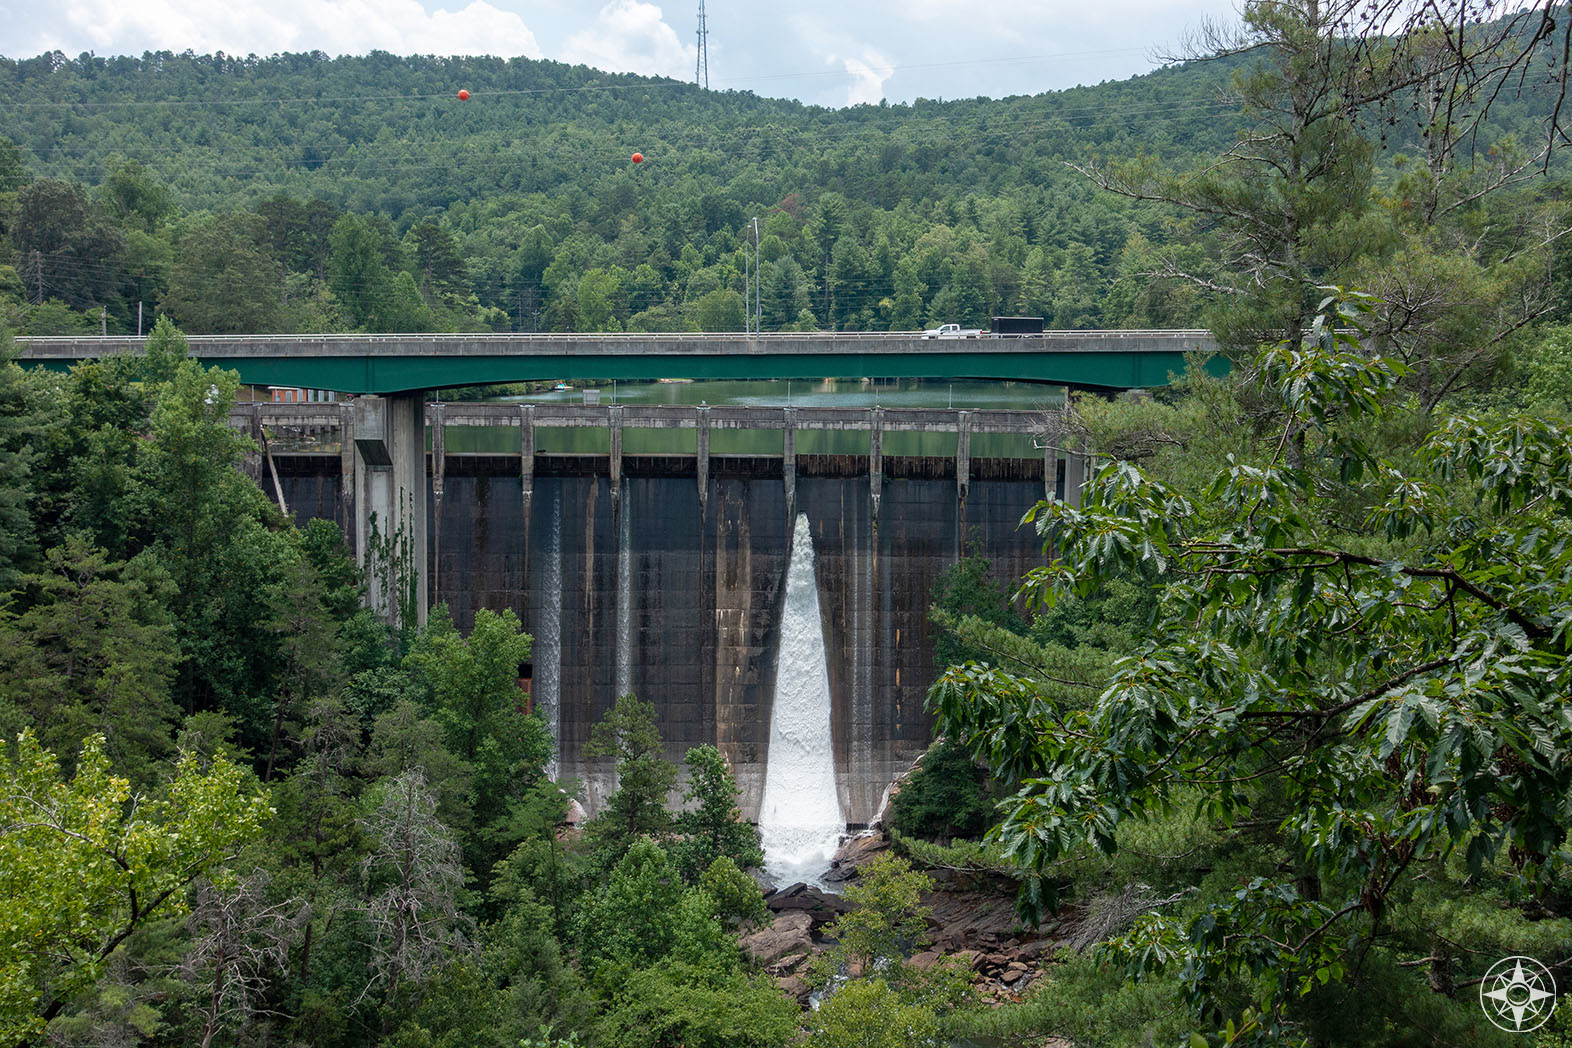 Regular water flow through opening in the hydroelectric Tallulah Dam - with the Tallulah Lake above, the gorge below and Highway 23 crossing in-between